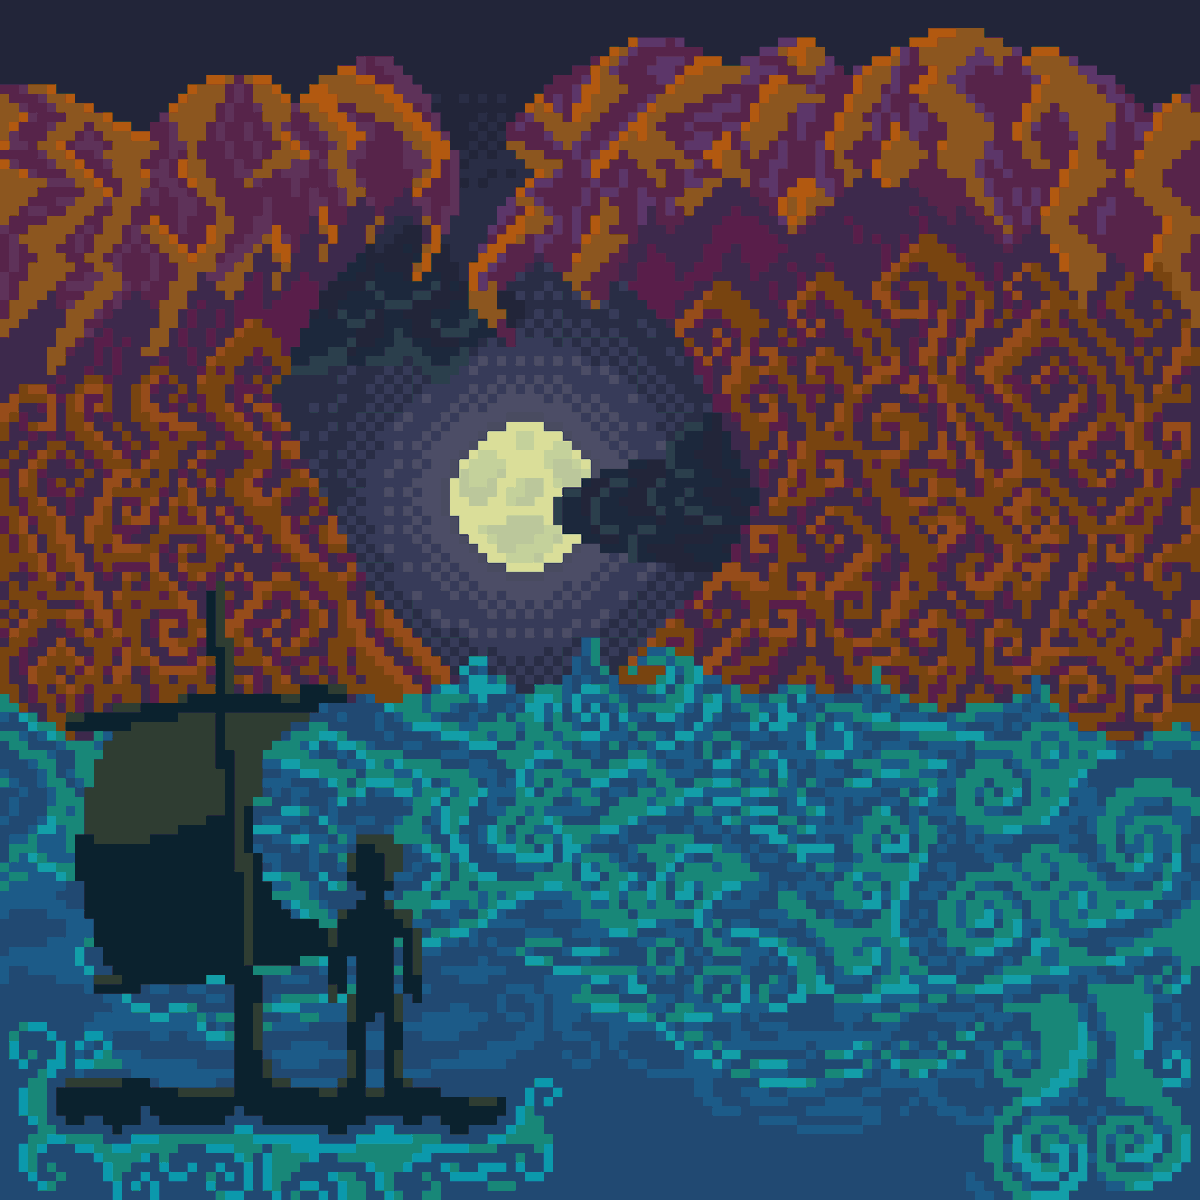 'The dilution of the sea that makes you, truly you'

#pixelart #noAI #idkanymore